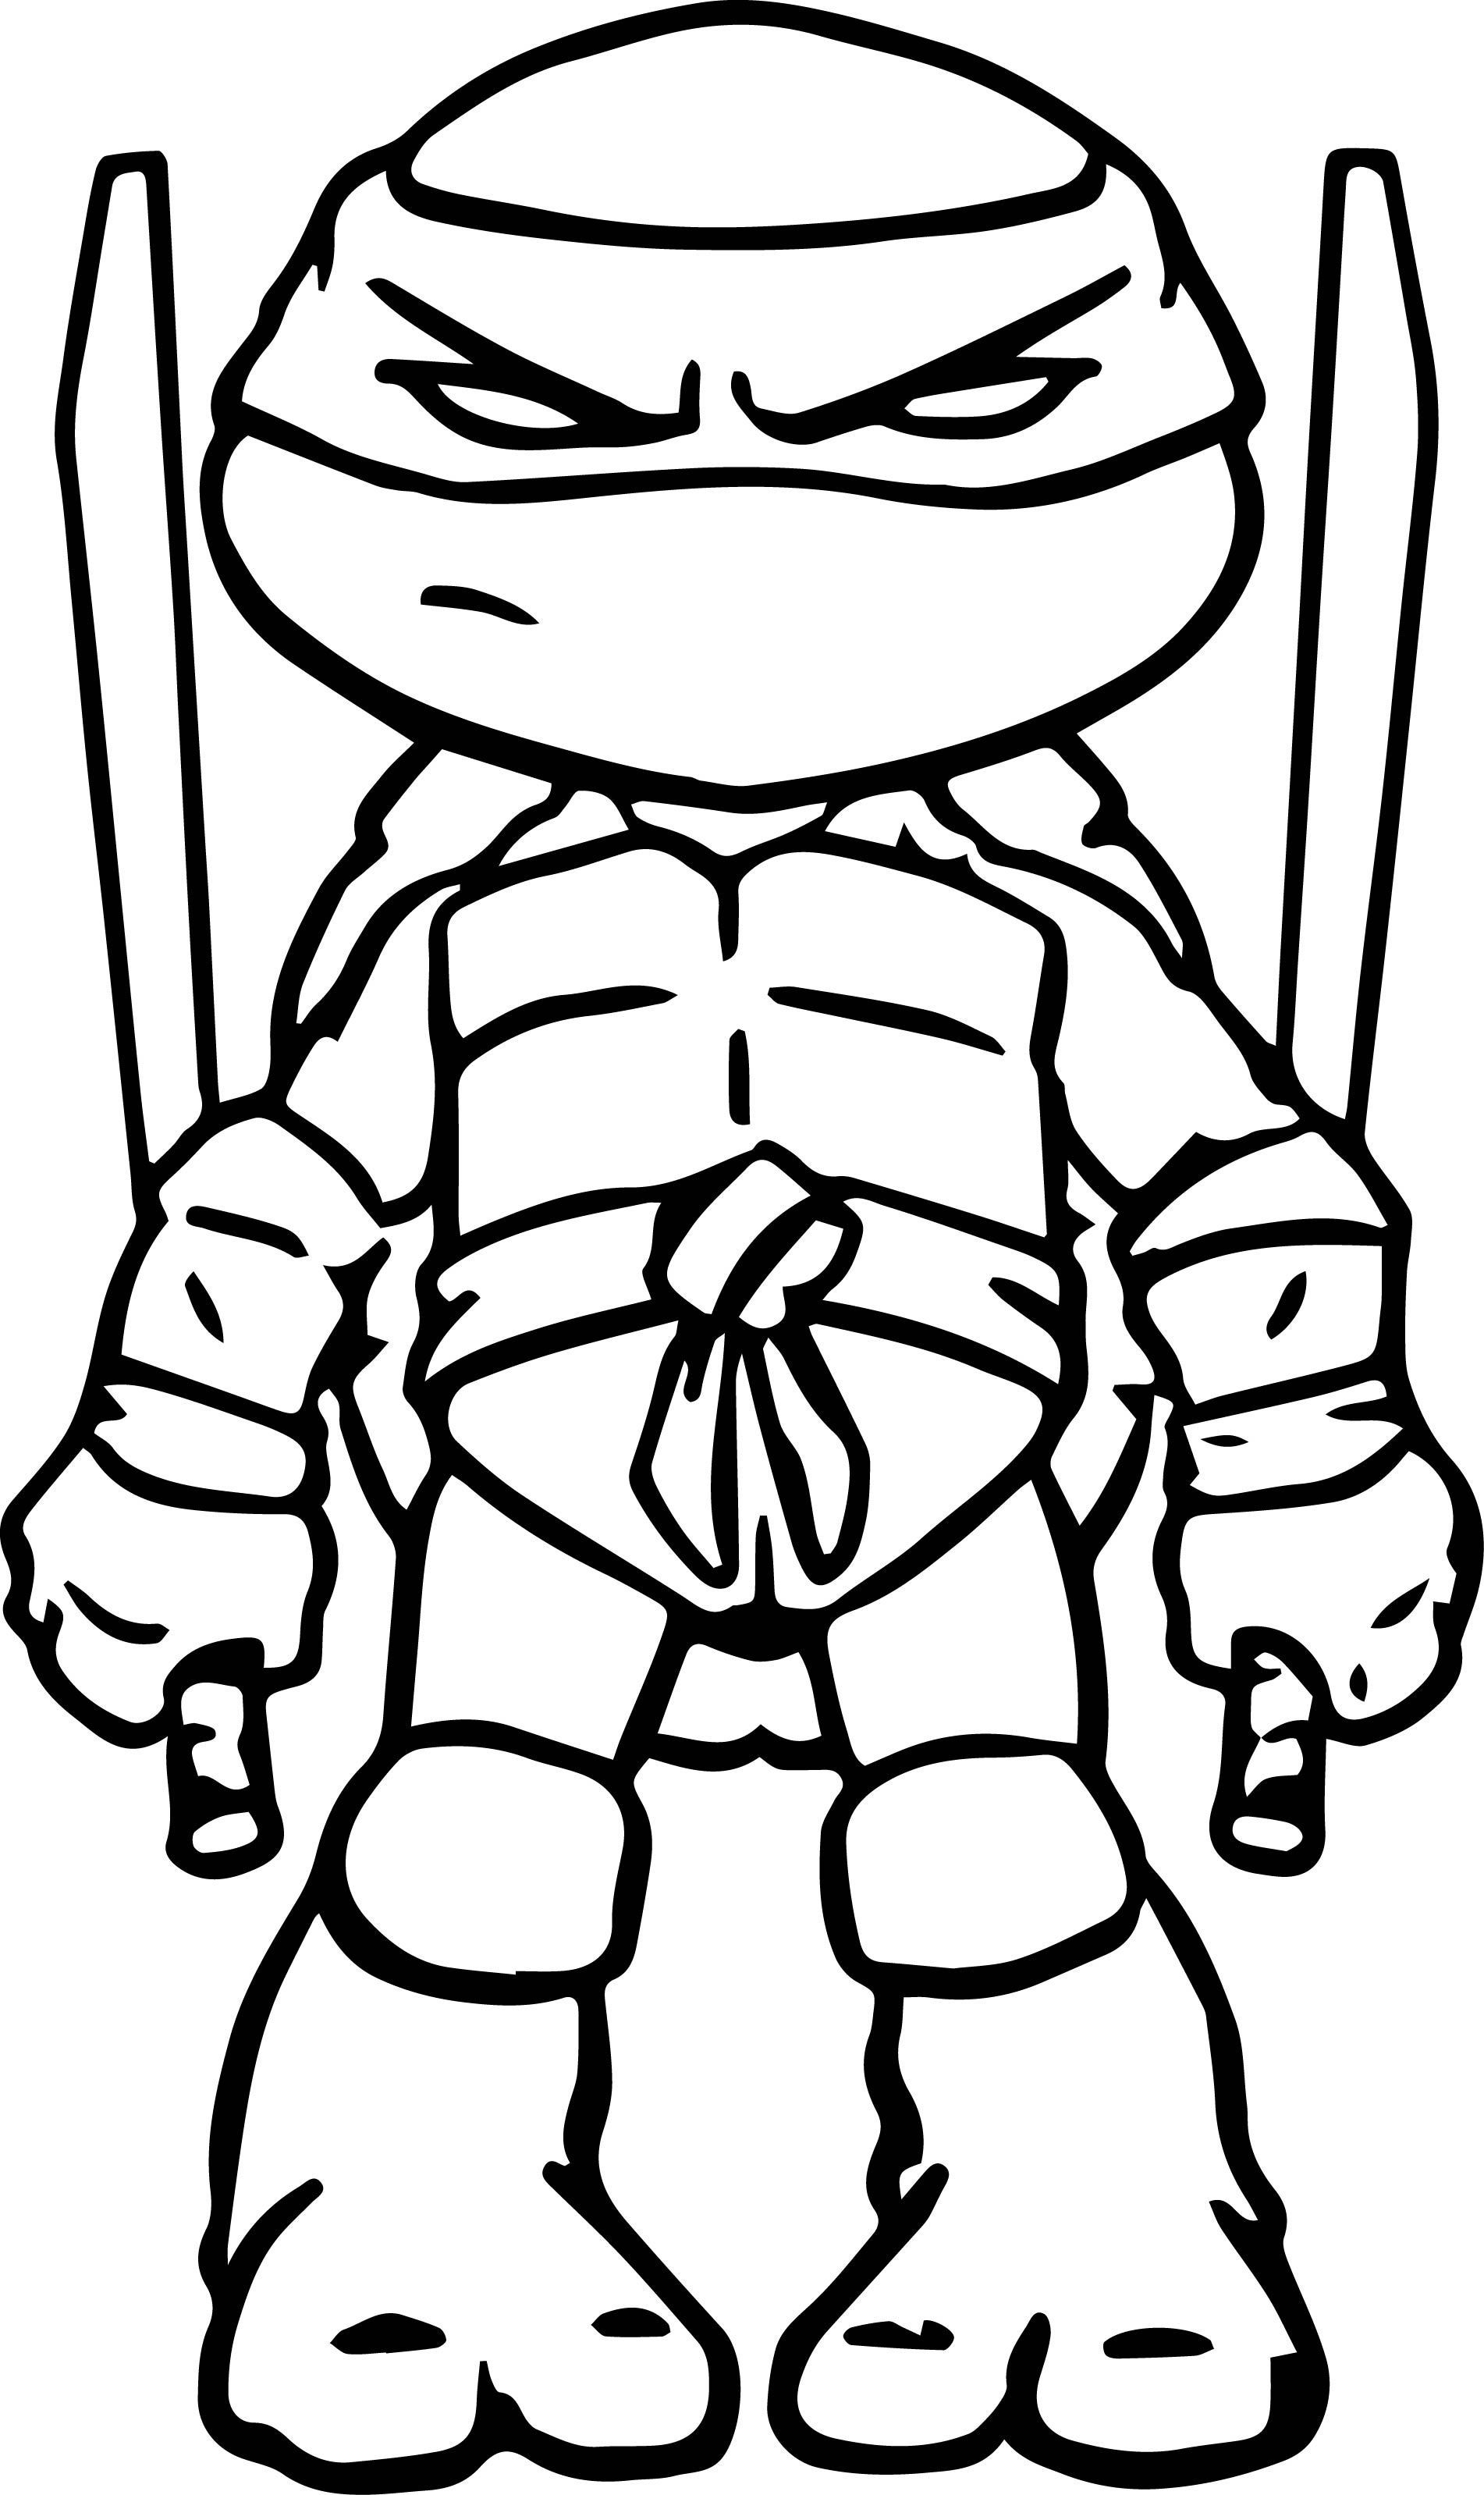 Ninja Turtles Coloring Pictures To Print - Coloring Page